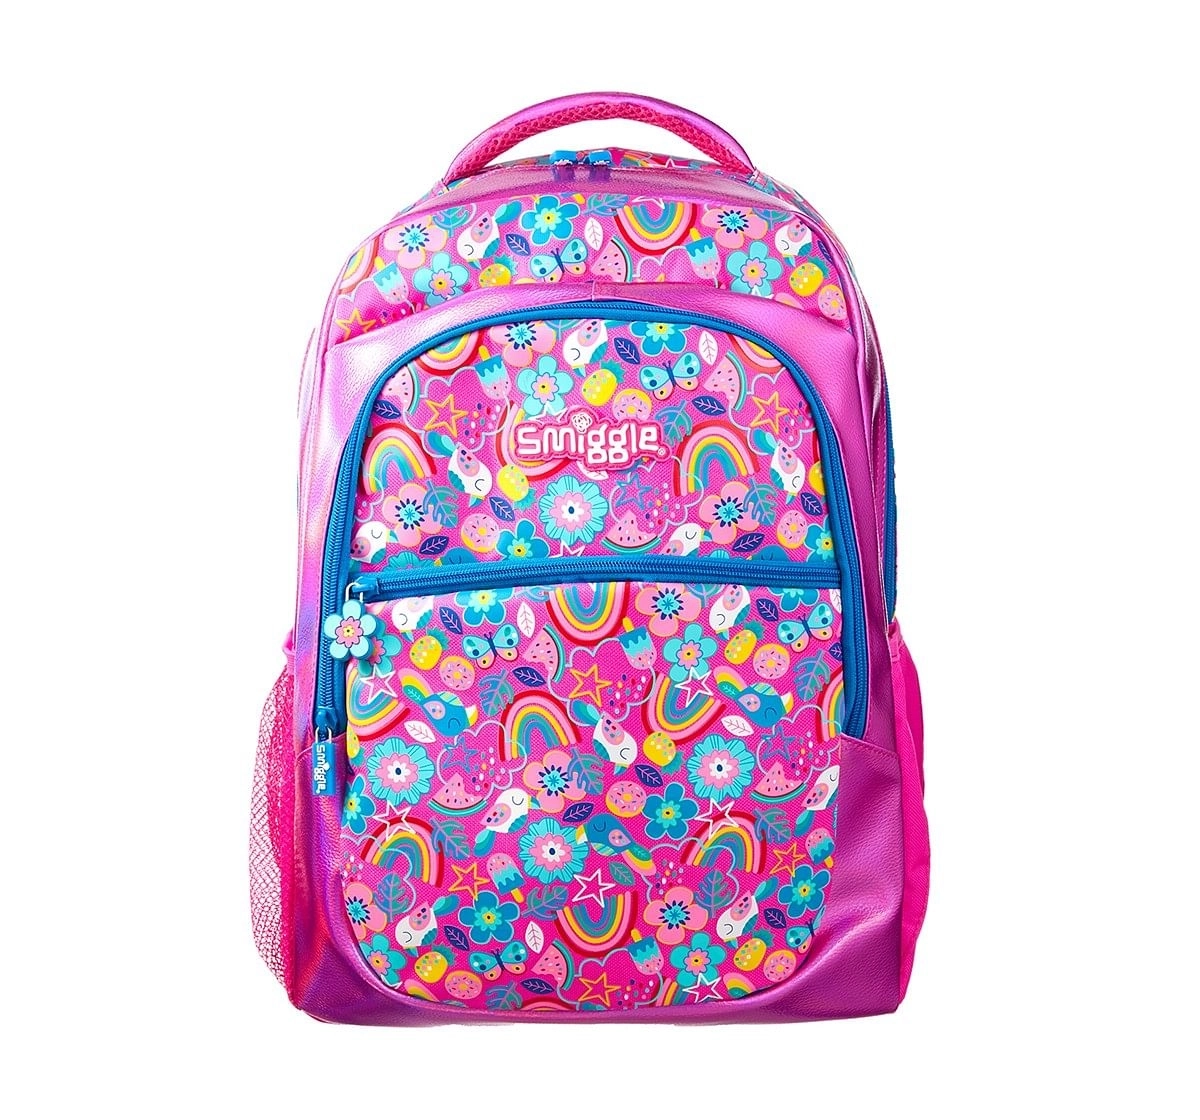 Smiggle Flow Backpack - Rainbow Print Bags for Kids age 3Y+ (Pink)